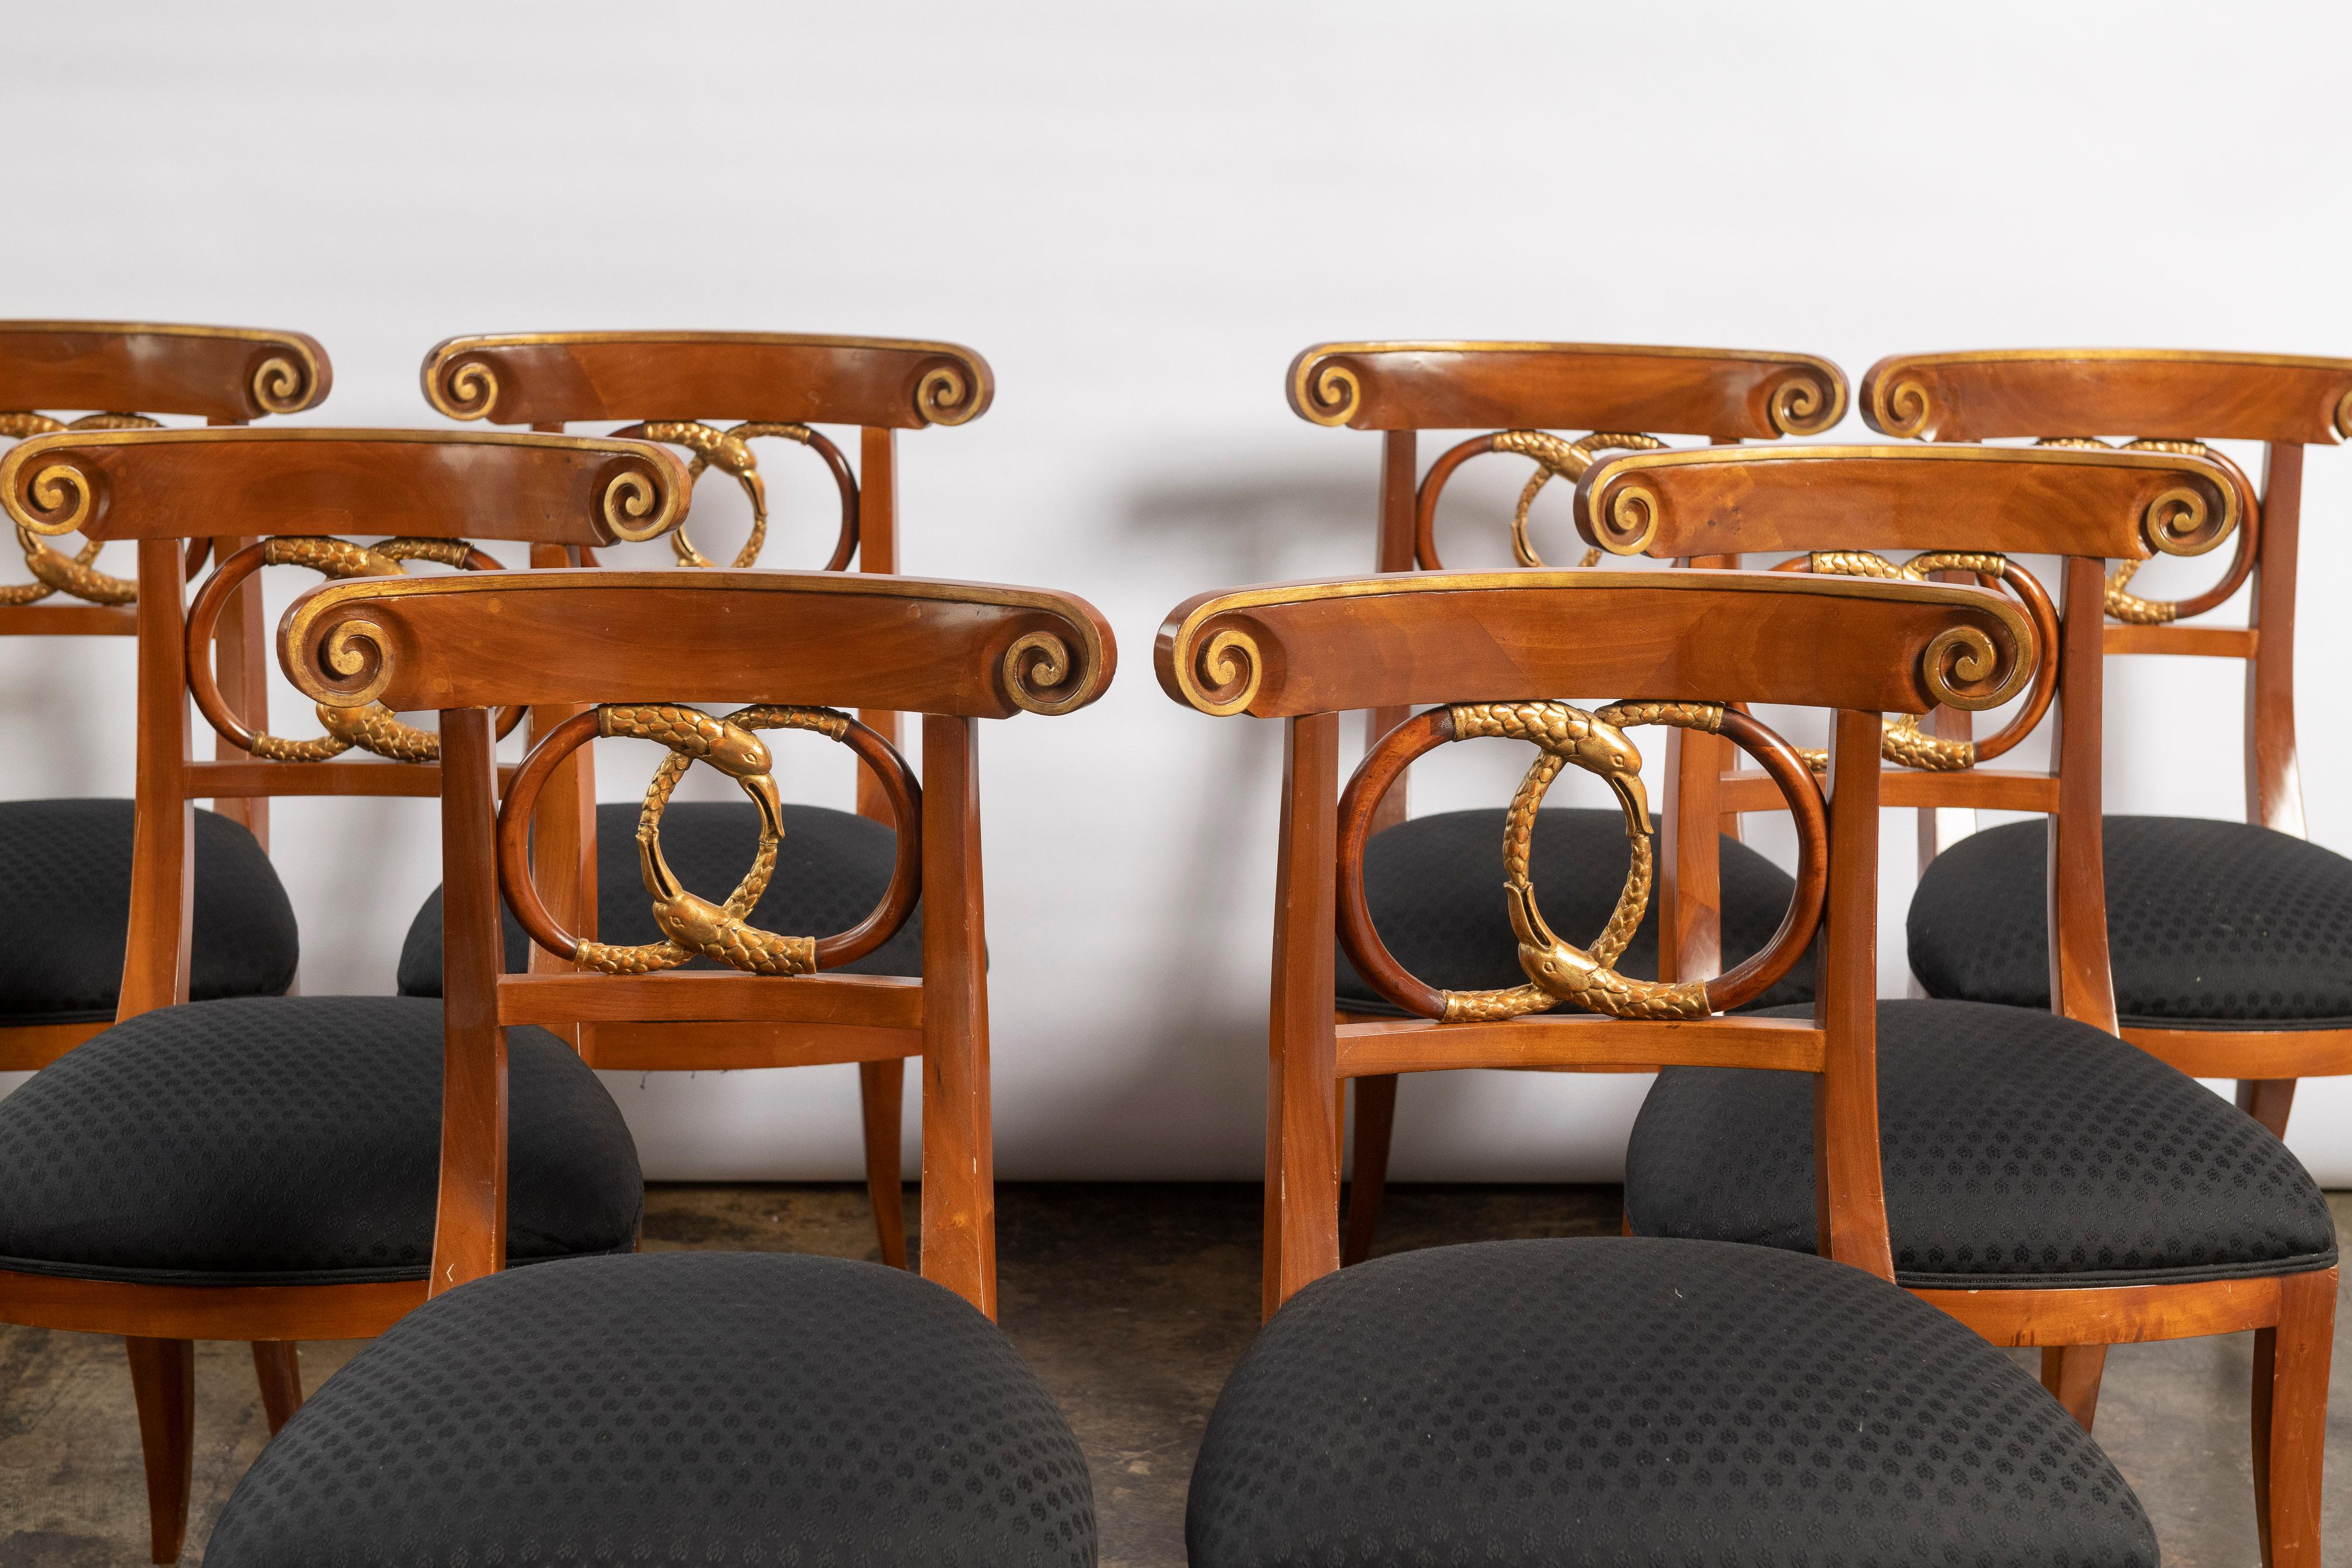 Set of eight beautifully proportioned mahogany dining chairs in the Biedermeier style made by Burton-Ching. The chairs have graceful sloping outward legs, a backrest of carved intertwined serpents in a double circular pattern and gilded scrollwork.